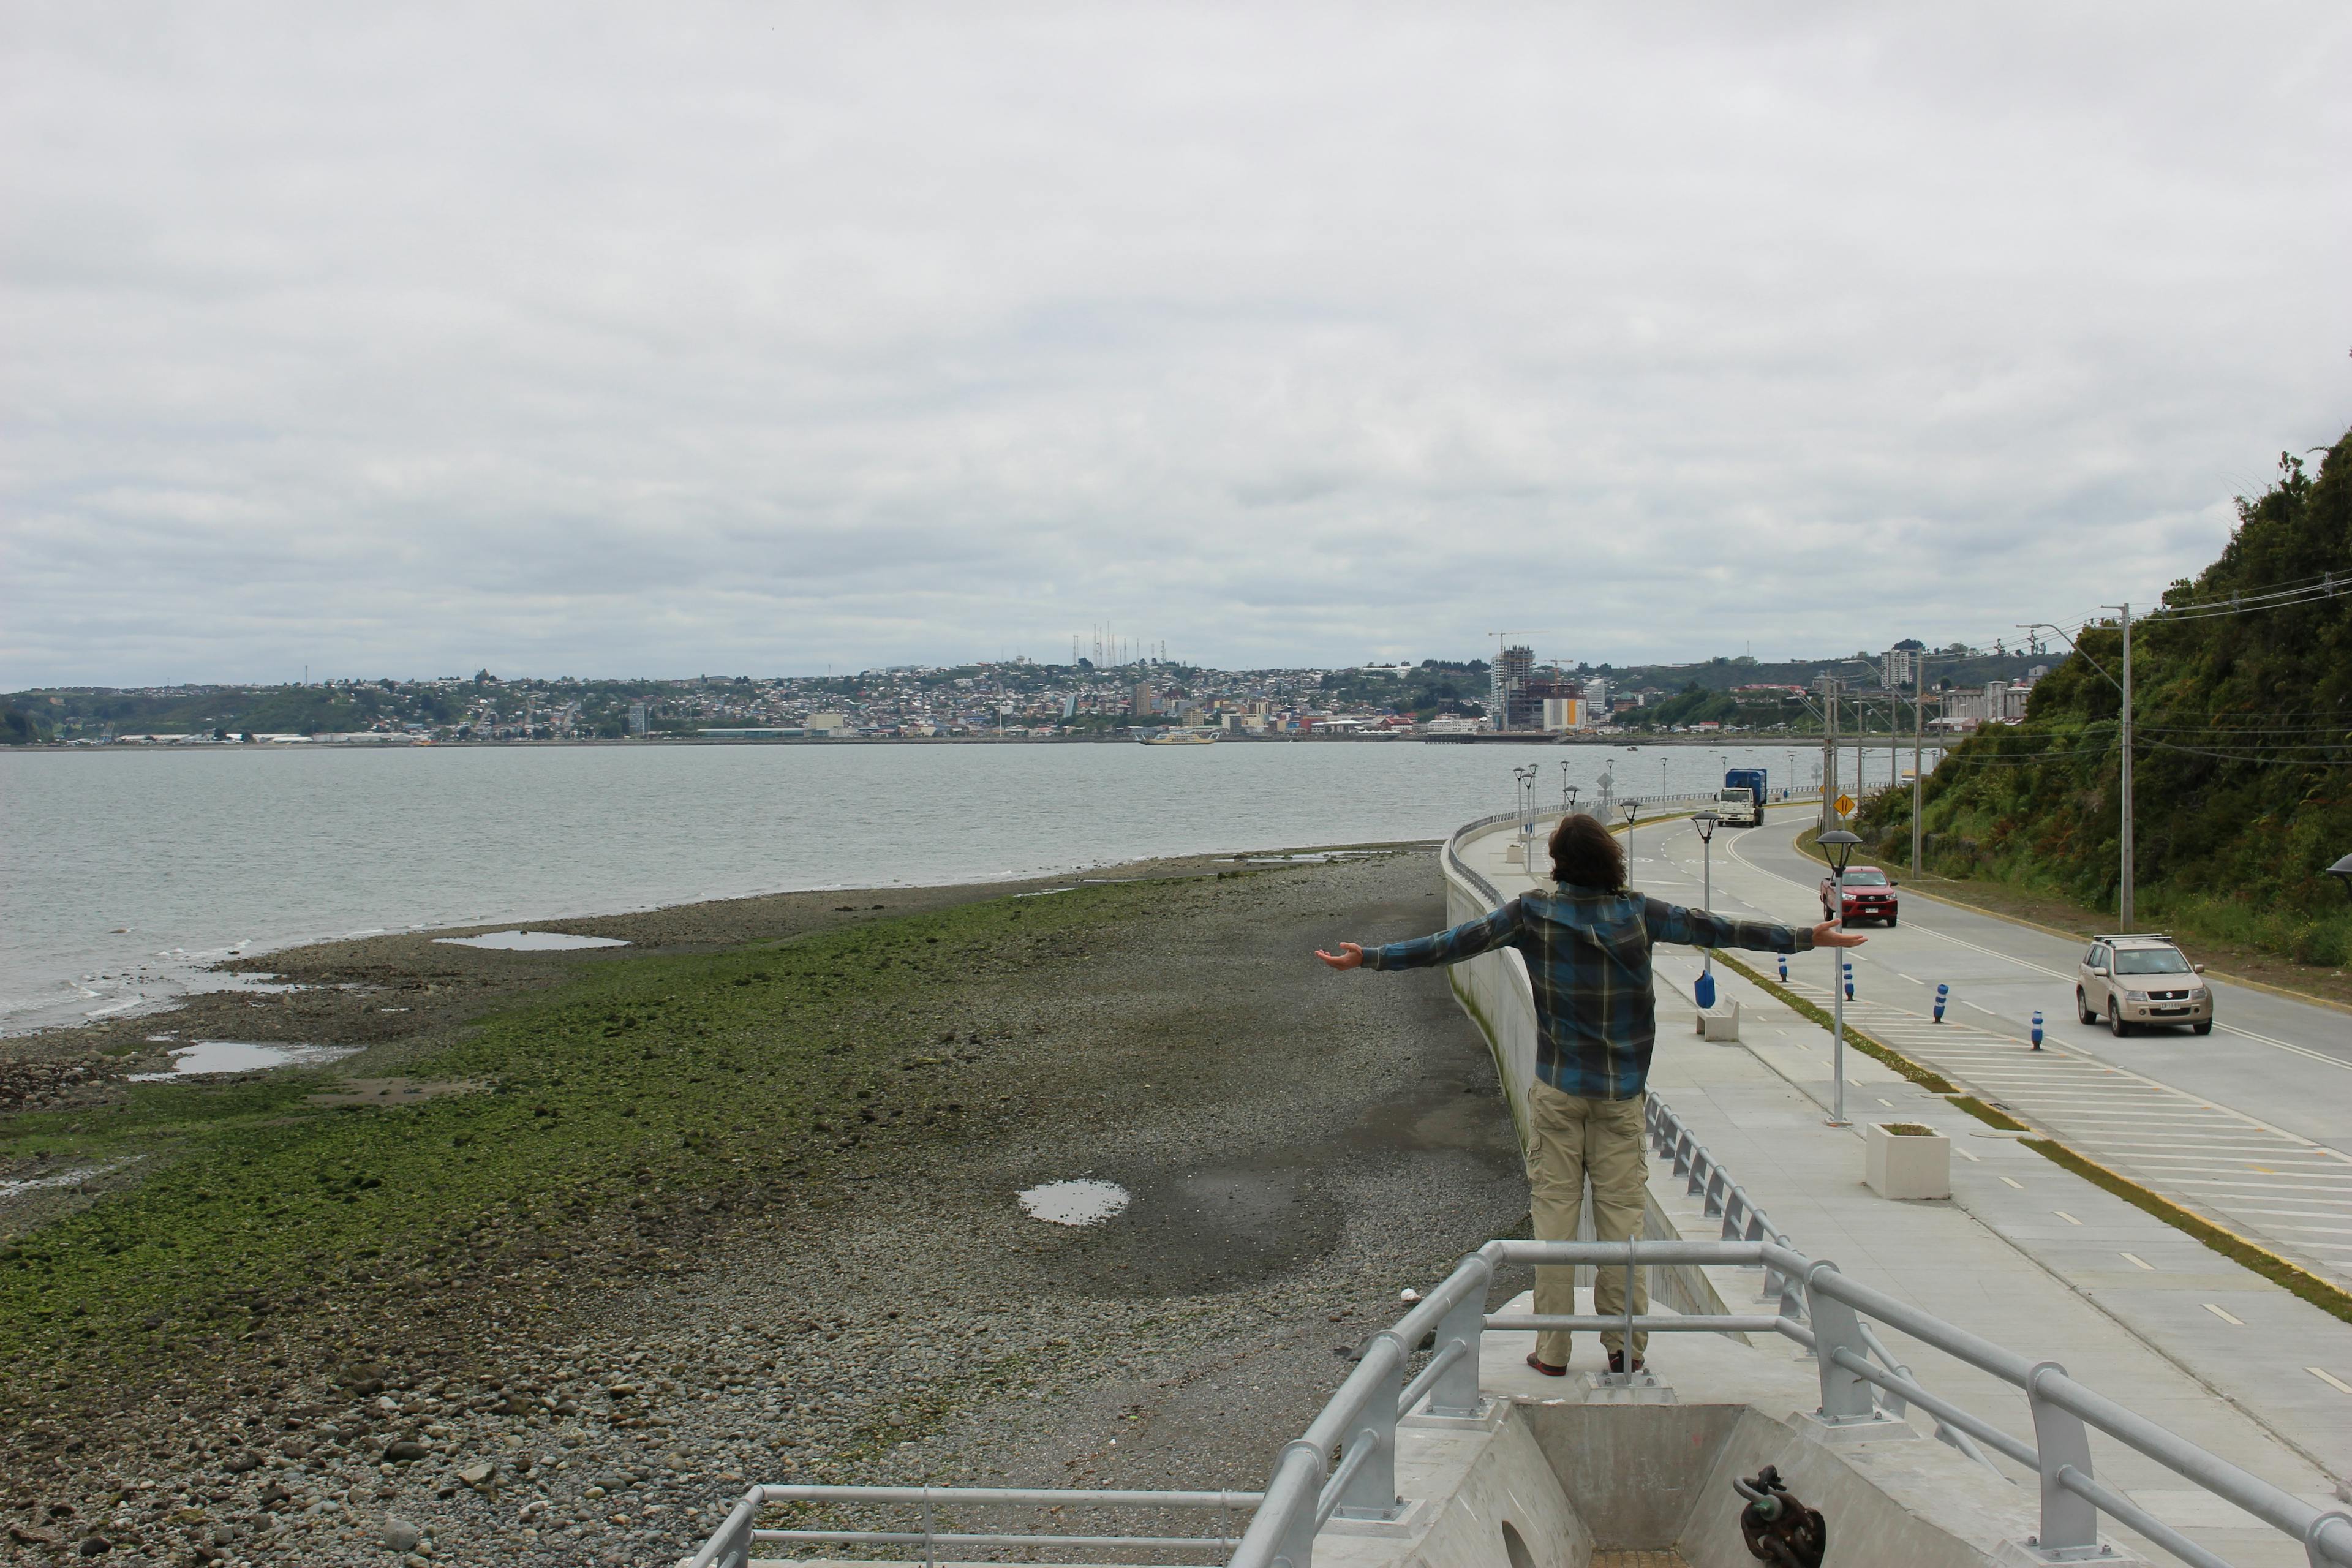 Gerrod recreating the Titanic at the Puerto Montt viewpoint